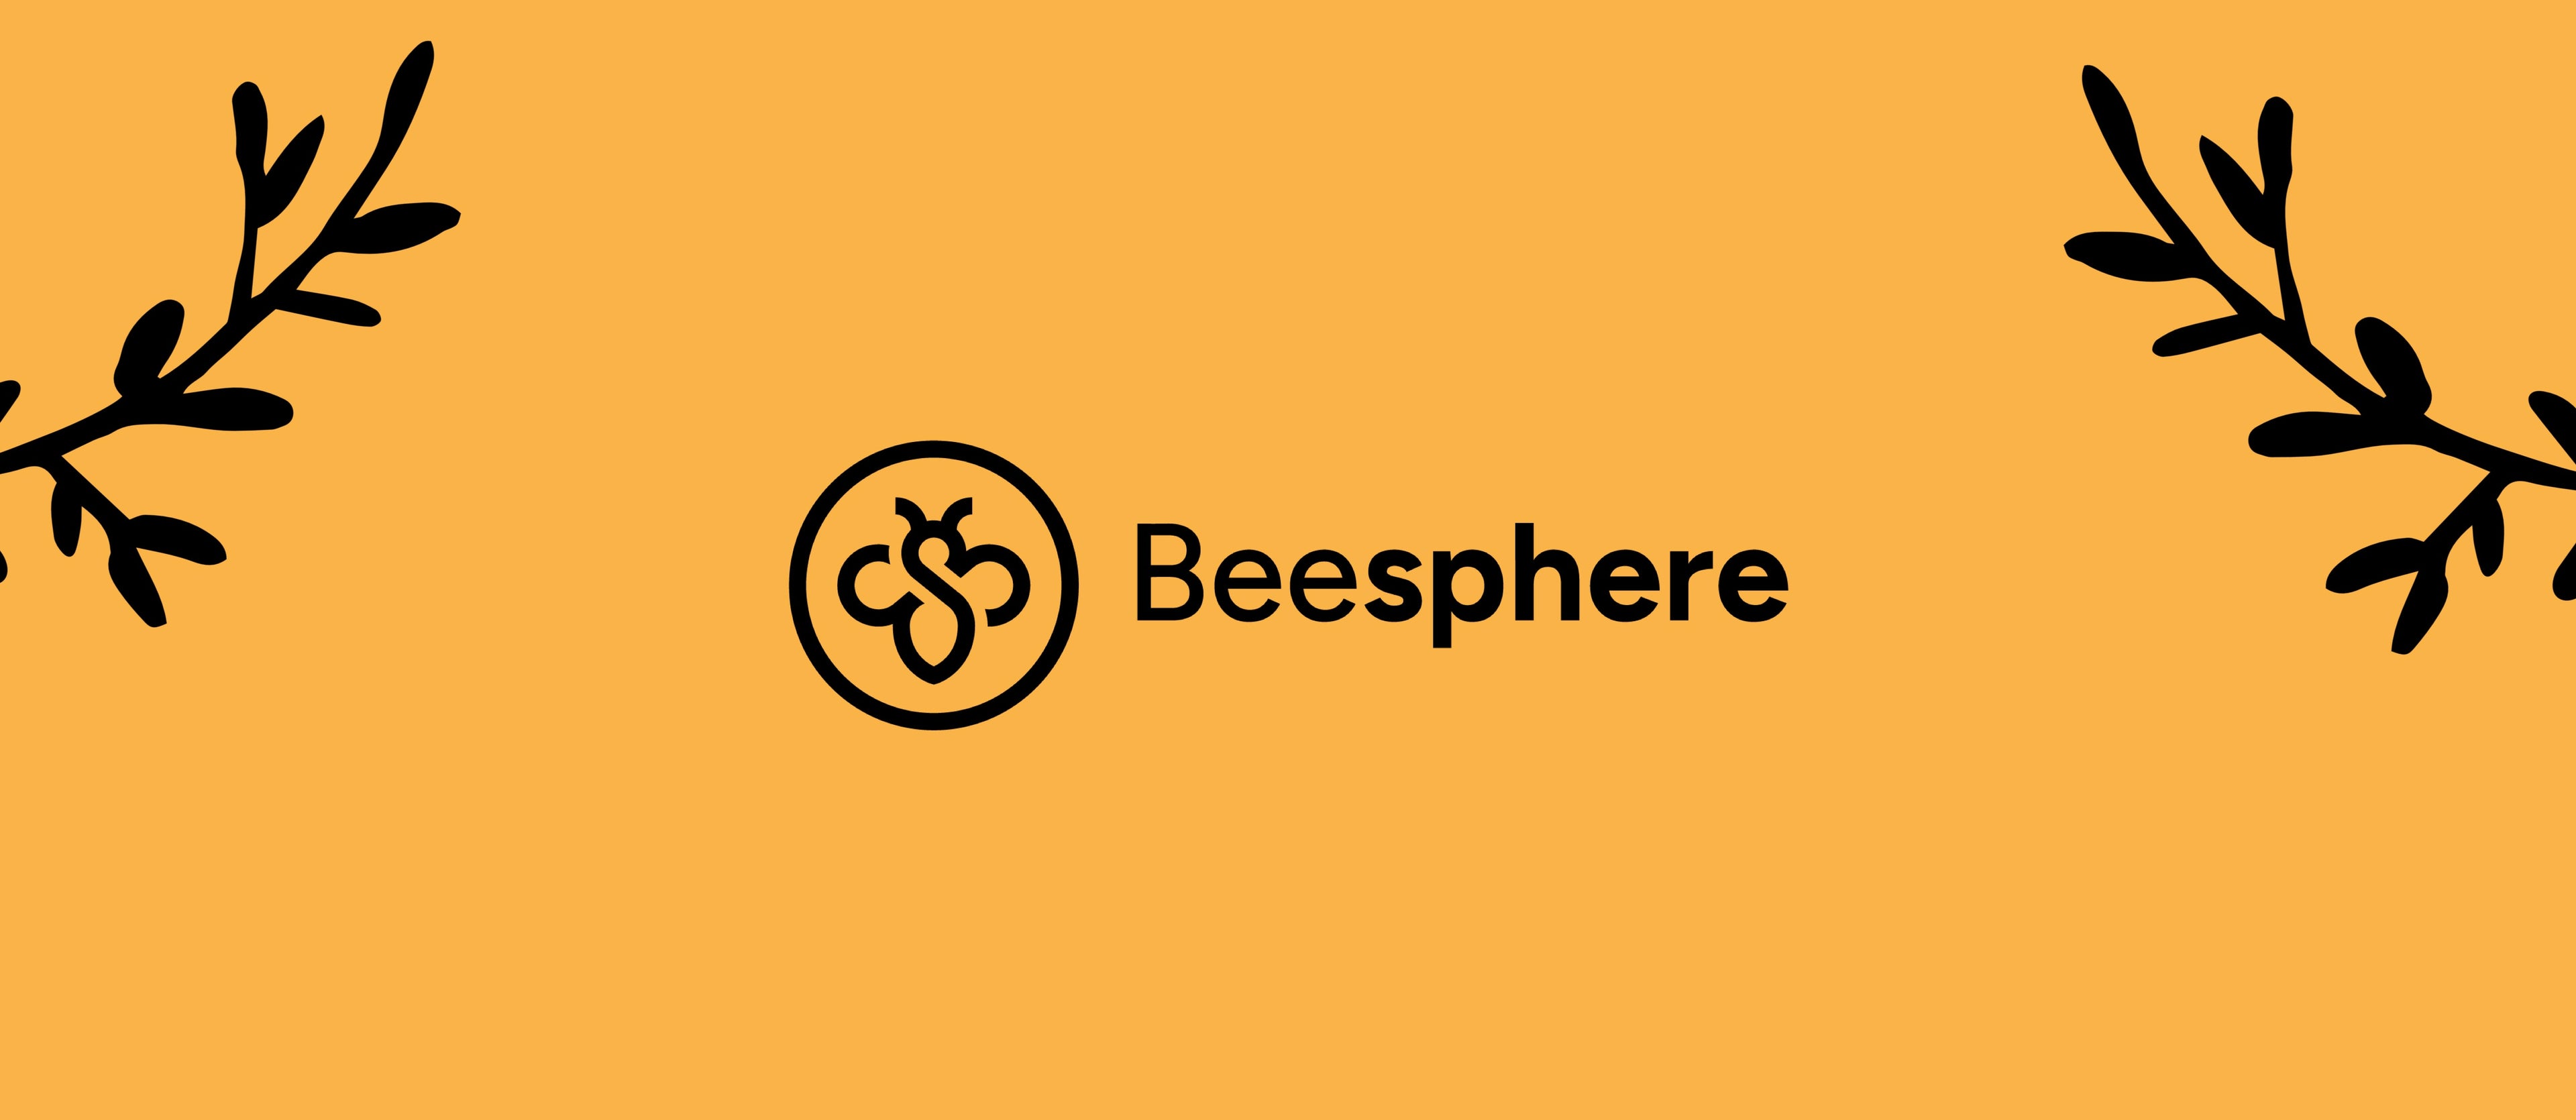 Beesphere logo with leaf background